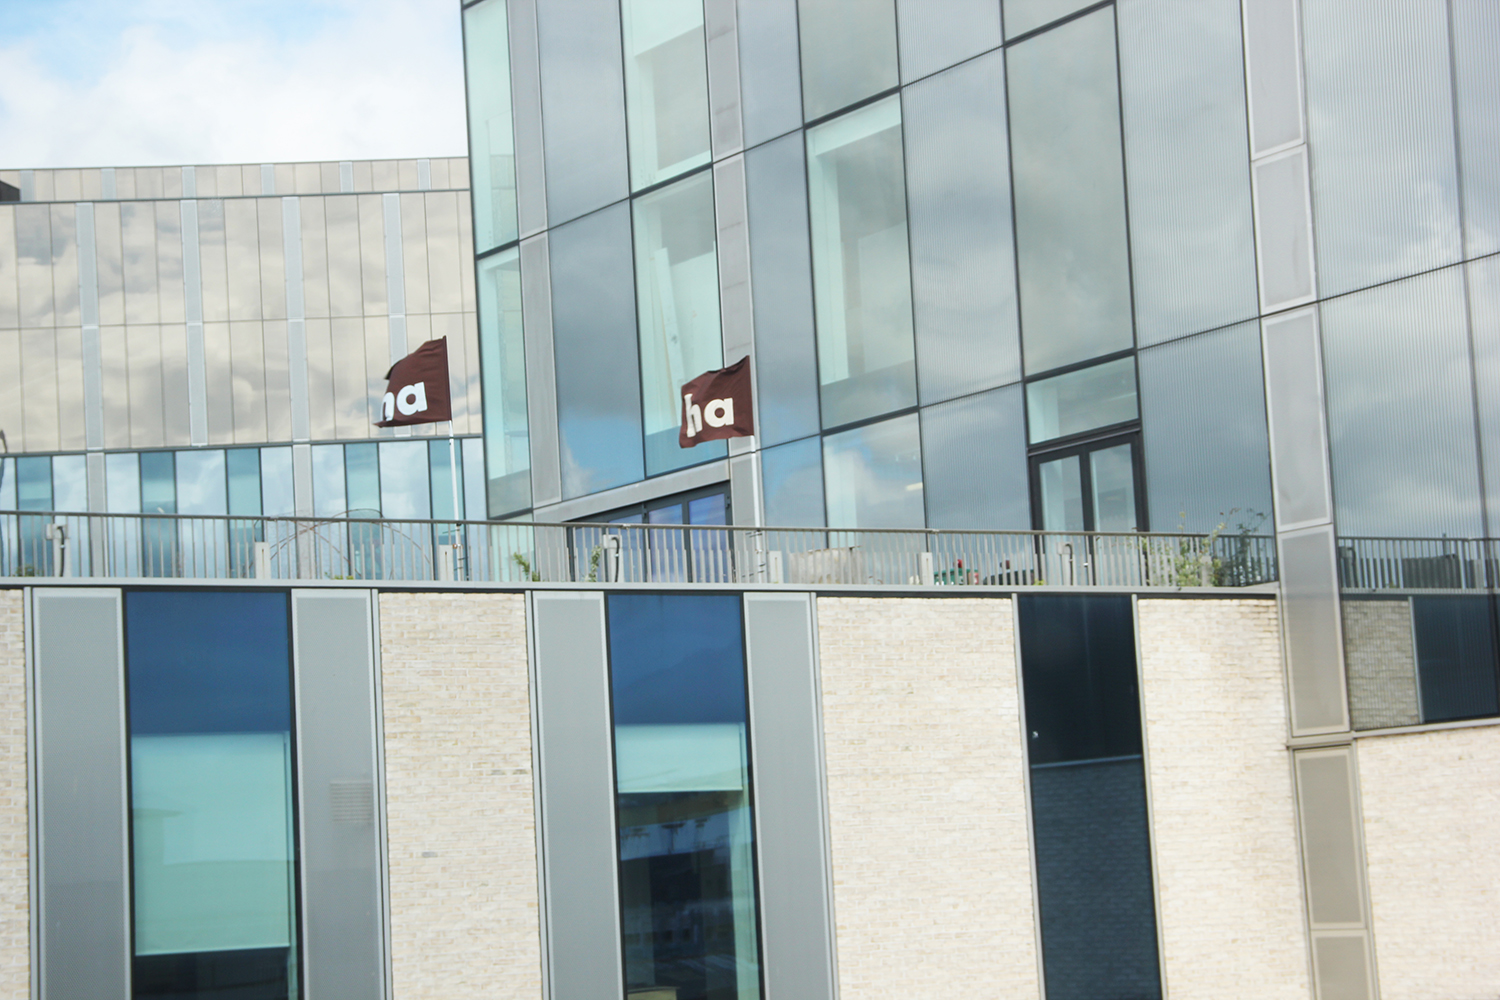 Image of two 'ha ha' flags on the BSoA - clearly displaying 'ha ha'.